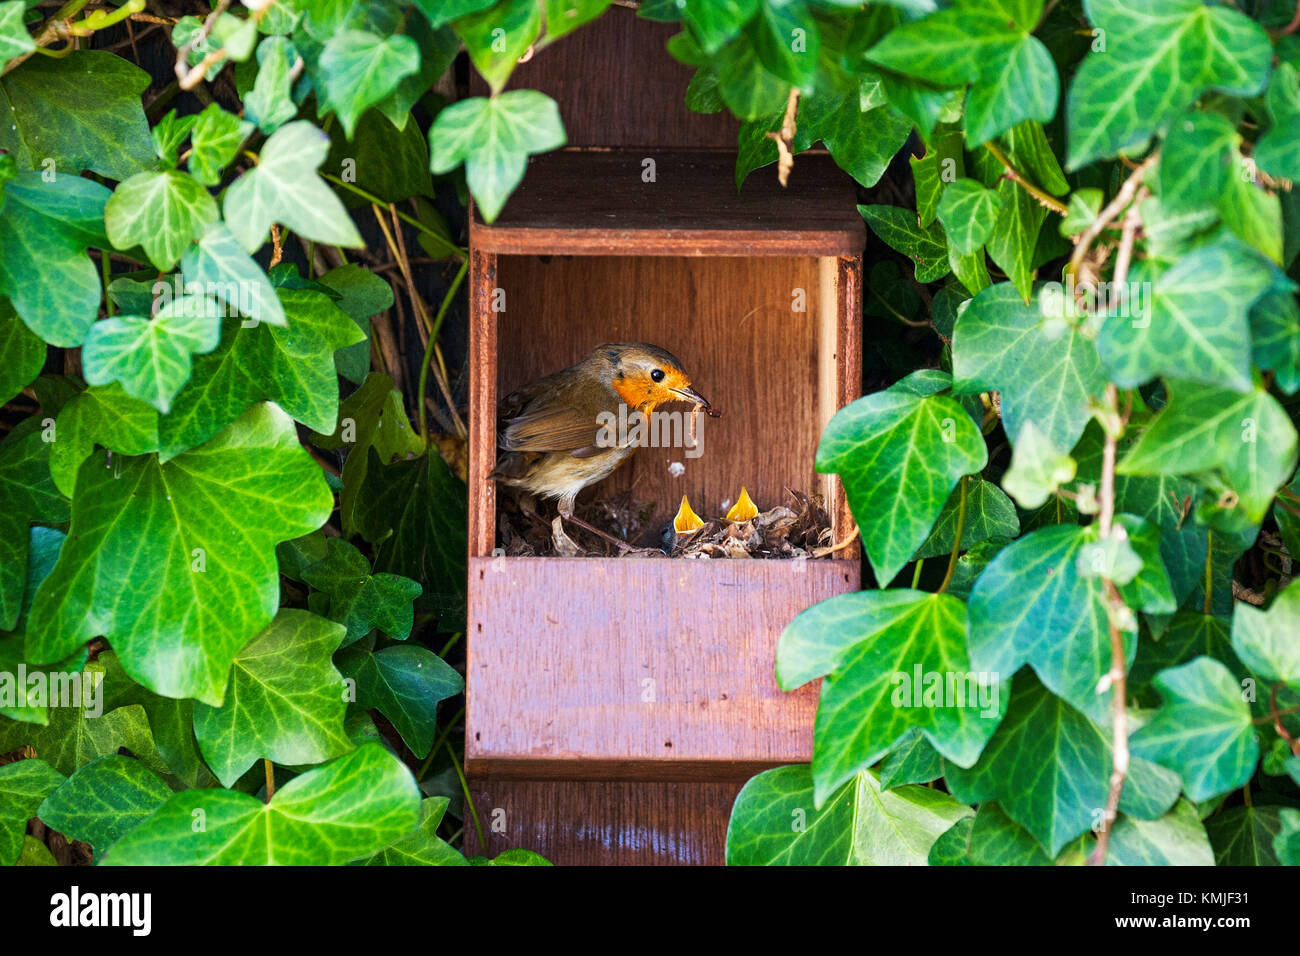 European robin Erithacus rubecula at nest with food for young in nesting box in a garden Ringwood Hampshire England UK Stock Photo